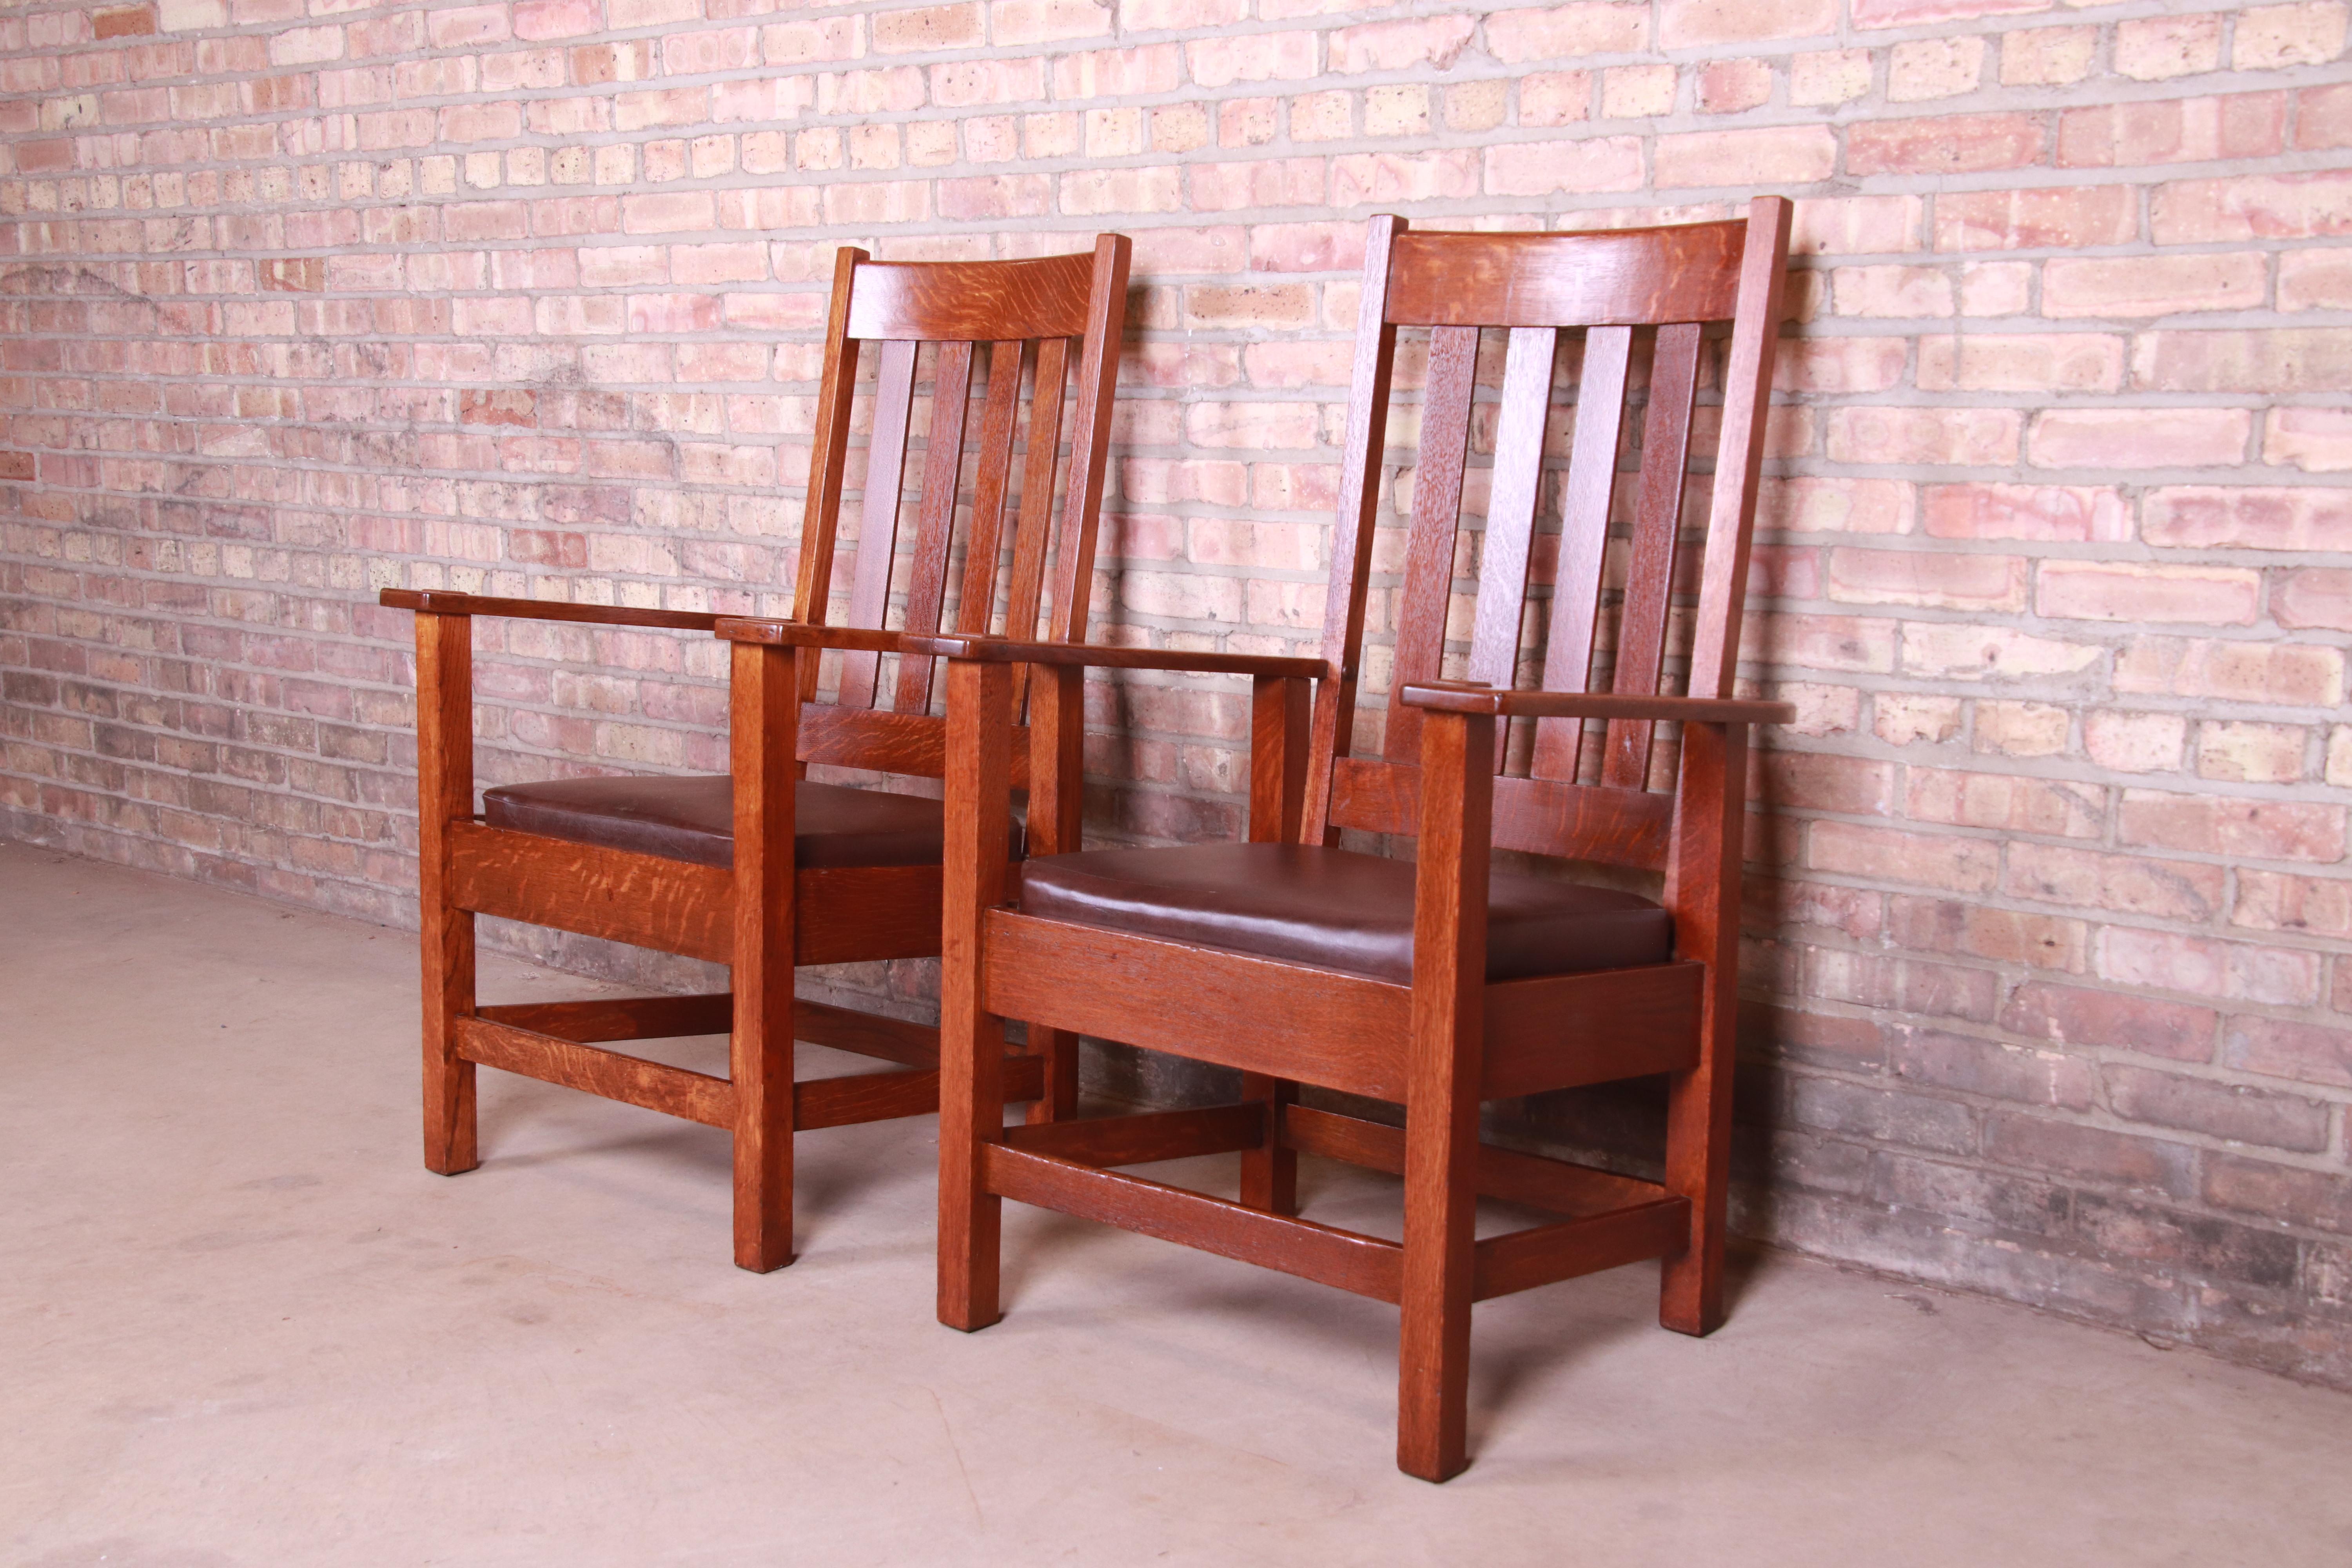 An exceptional pair of antique mission oak Arts & Crafts high back club chairs or lounge chairs

By Stickley Brothers

USA, circa 1900

Solid quarter sawn oak, with brown leather upholstery.

Measures: 27.38